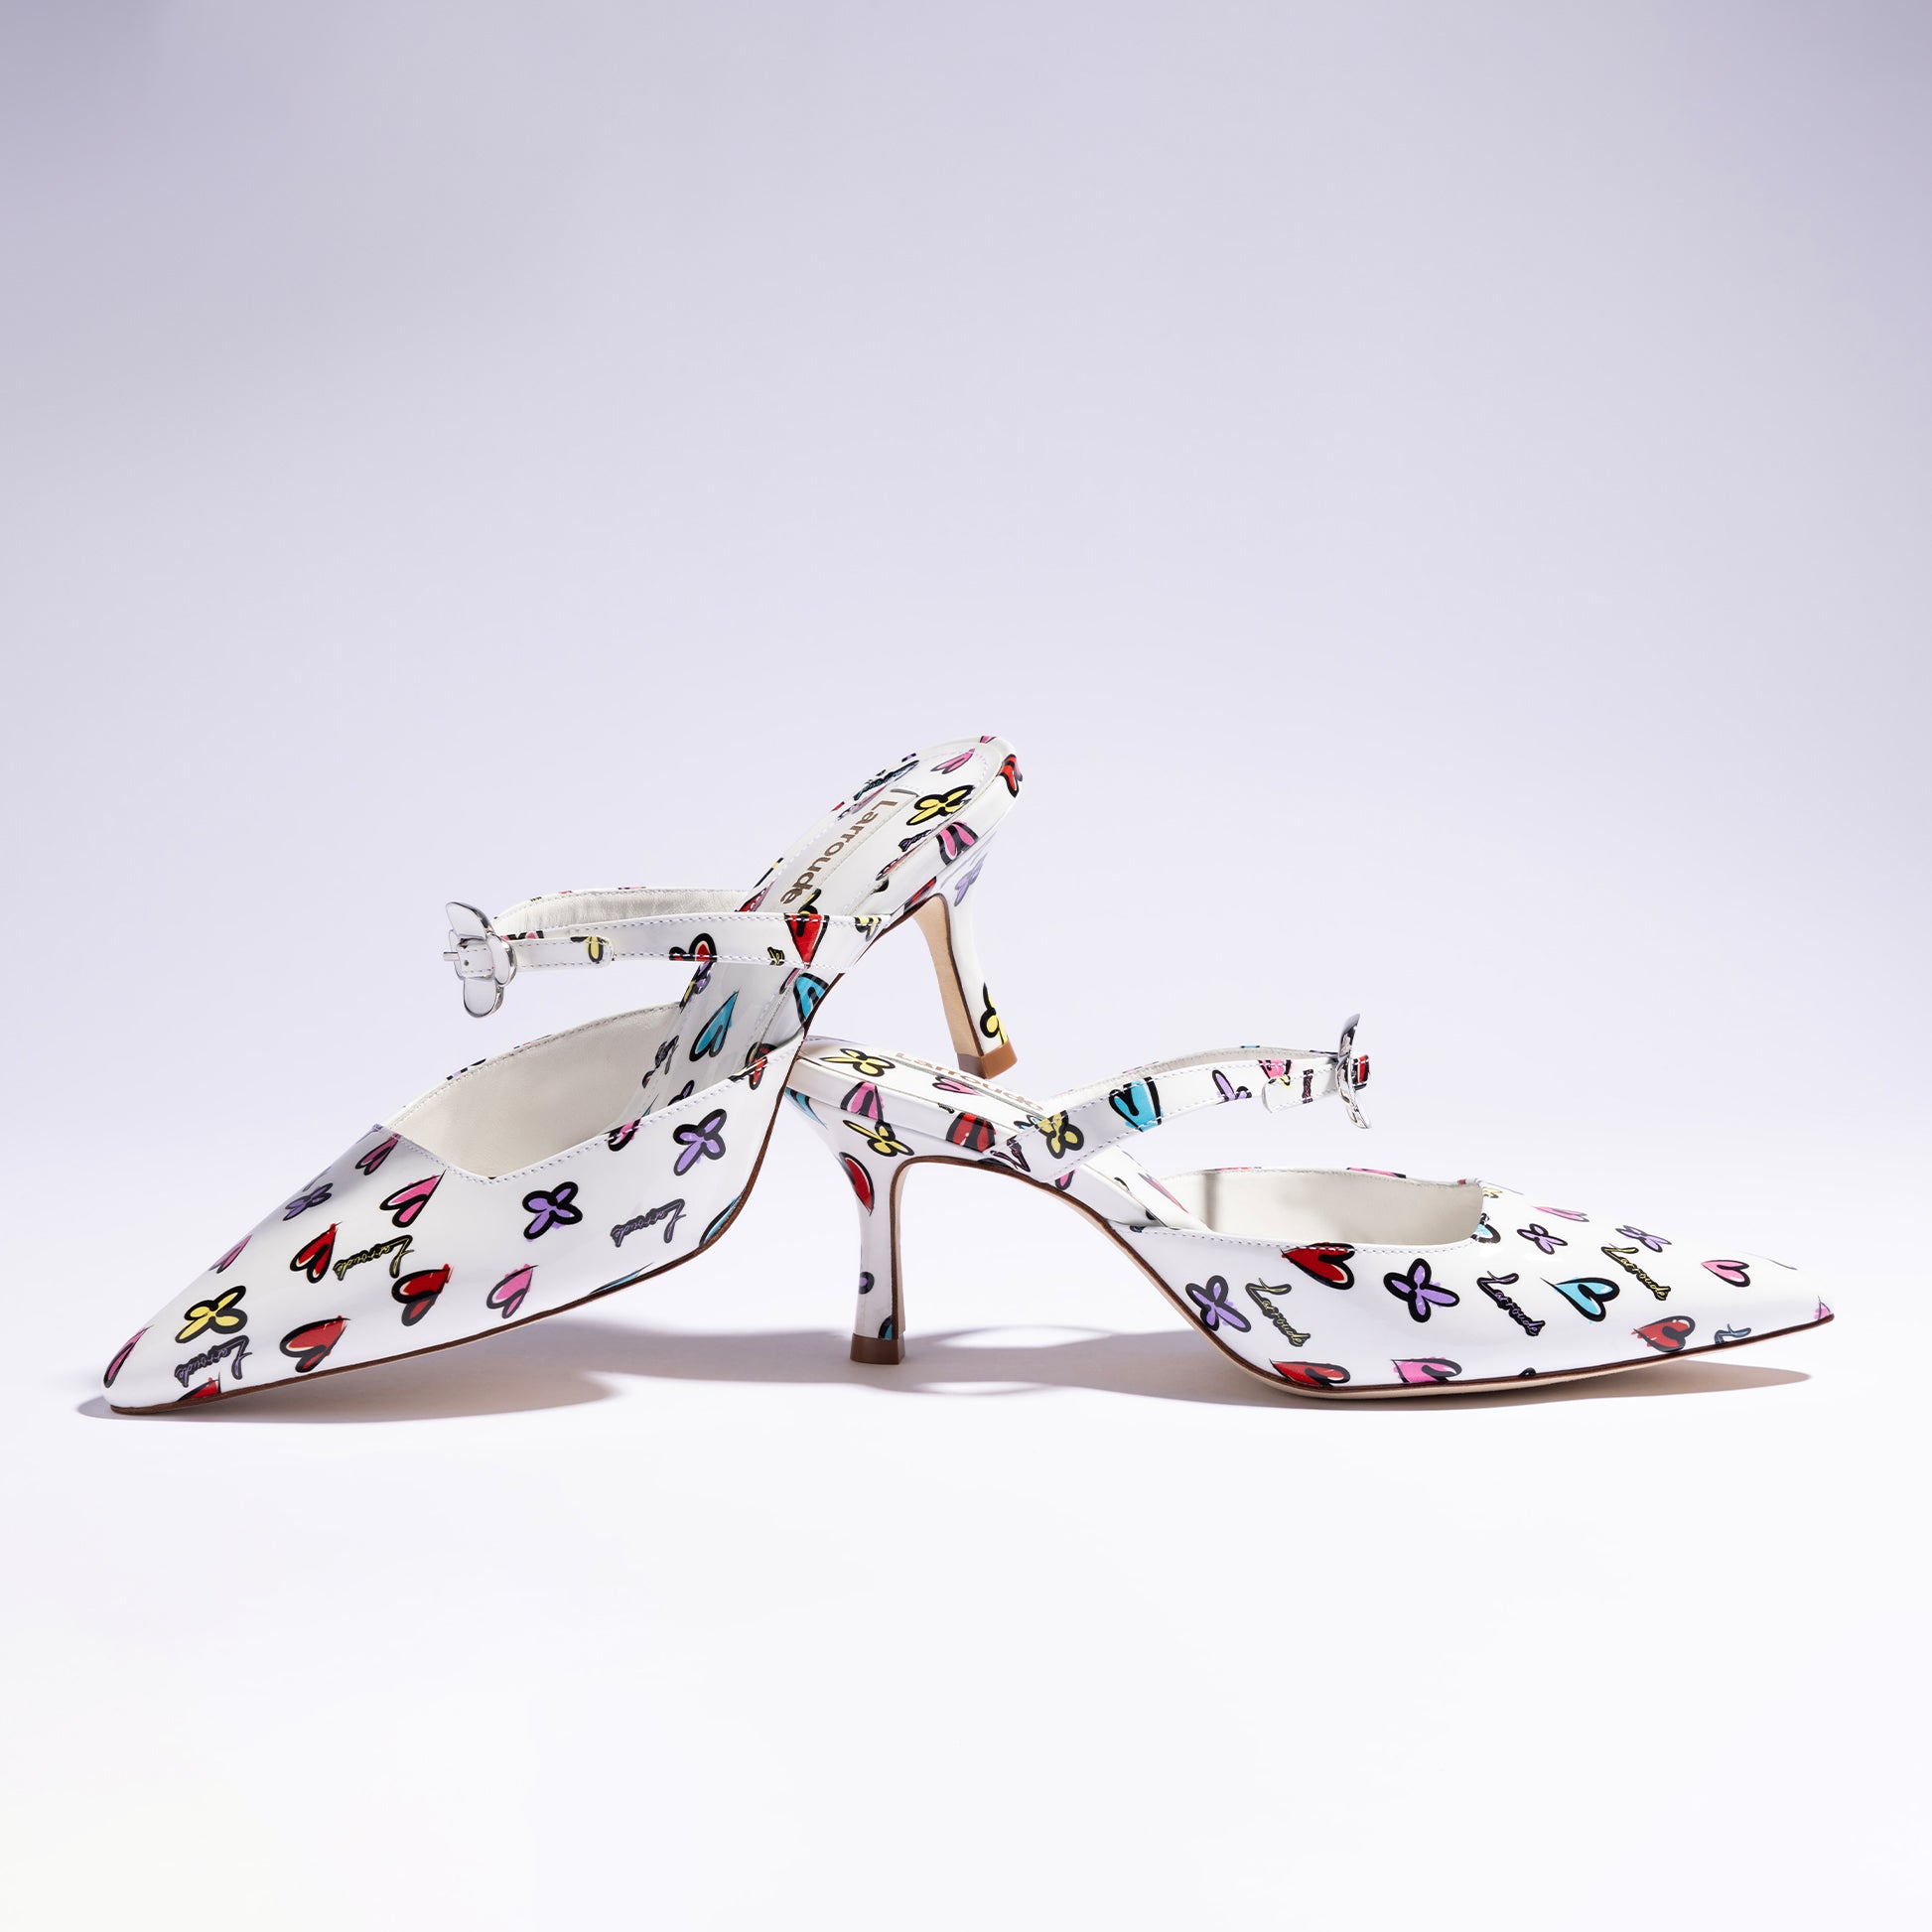 Daisy Pump In White Heart Printed Leather